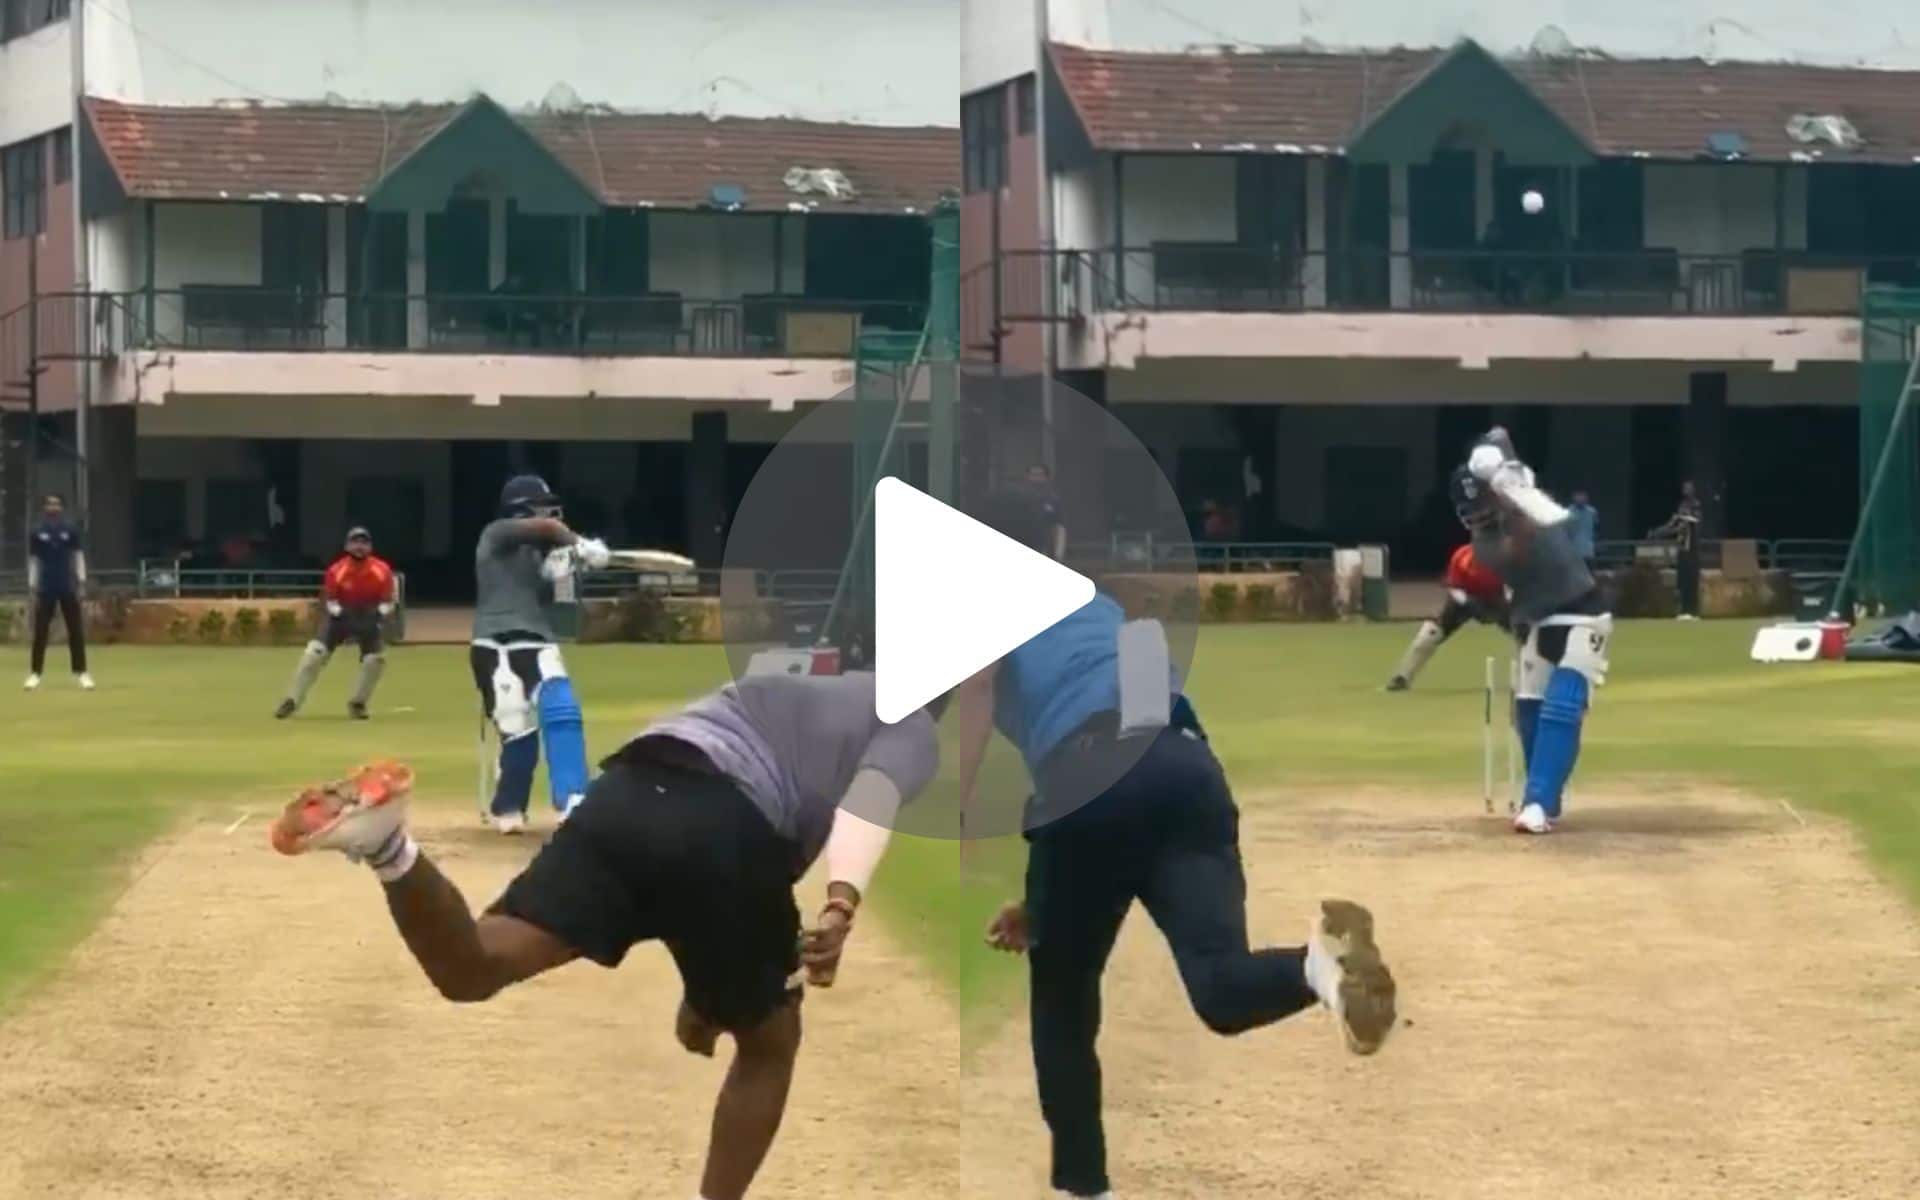 [Watch] KL Rahul Shows His Class In An Intense Batting Session Ahead Of SL Series